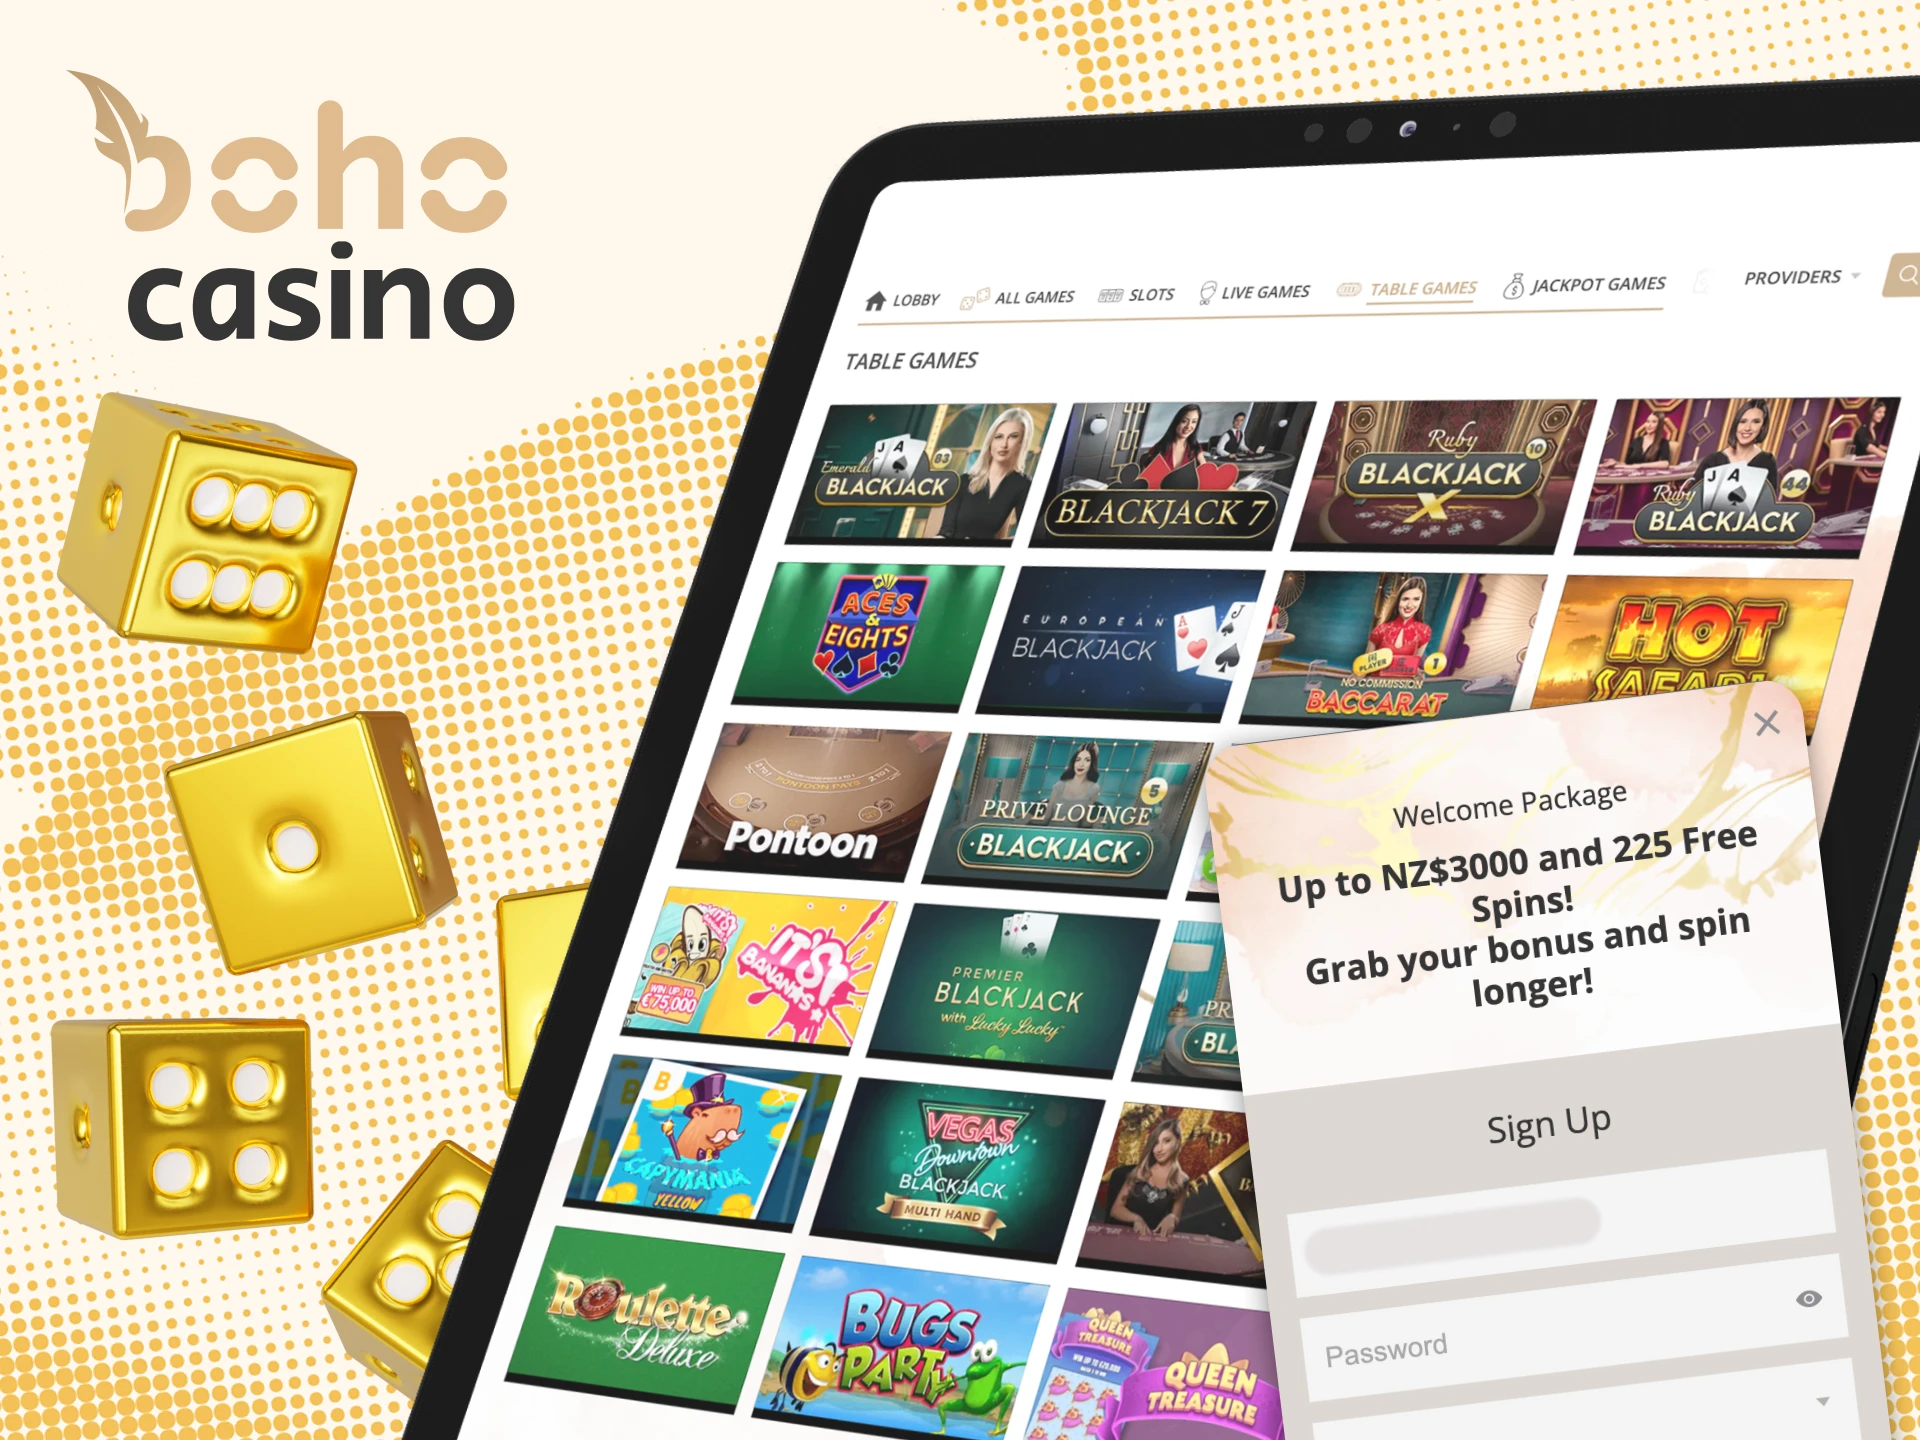 Make your first deposit after registration and start playing Boho Casino table games section.